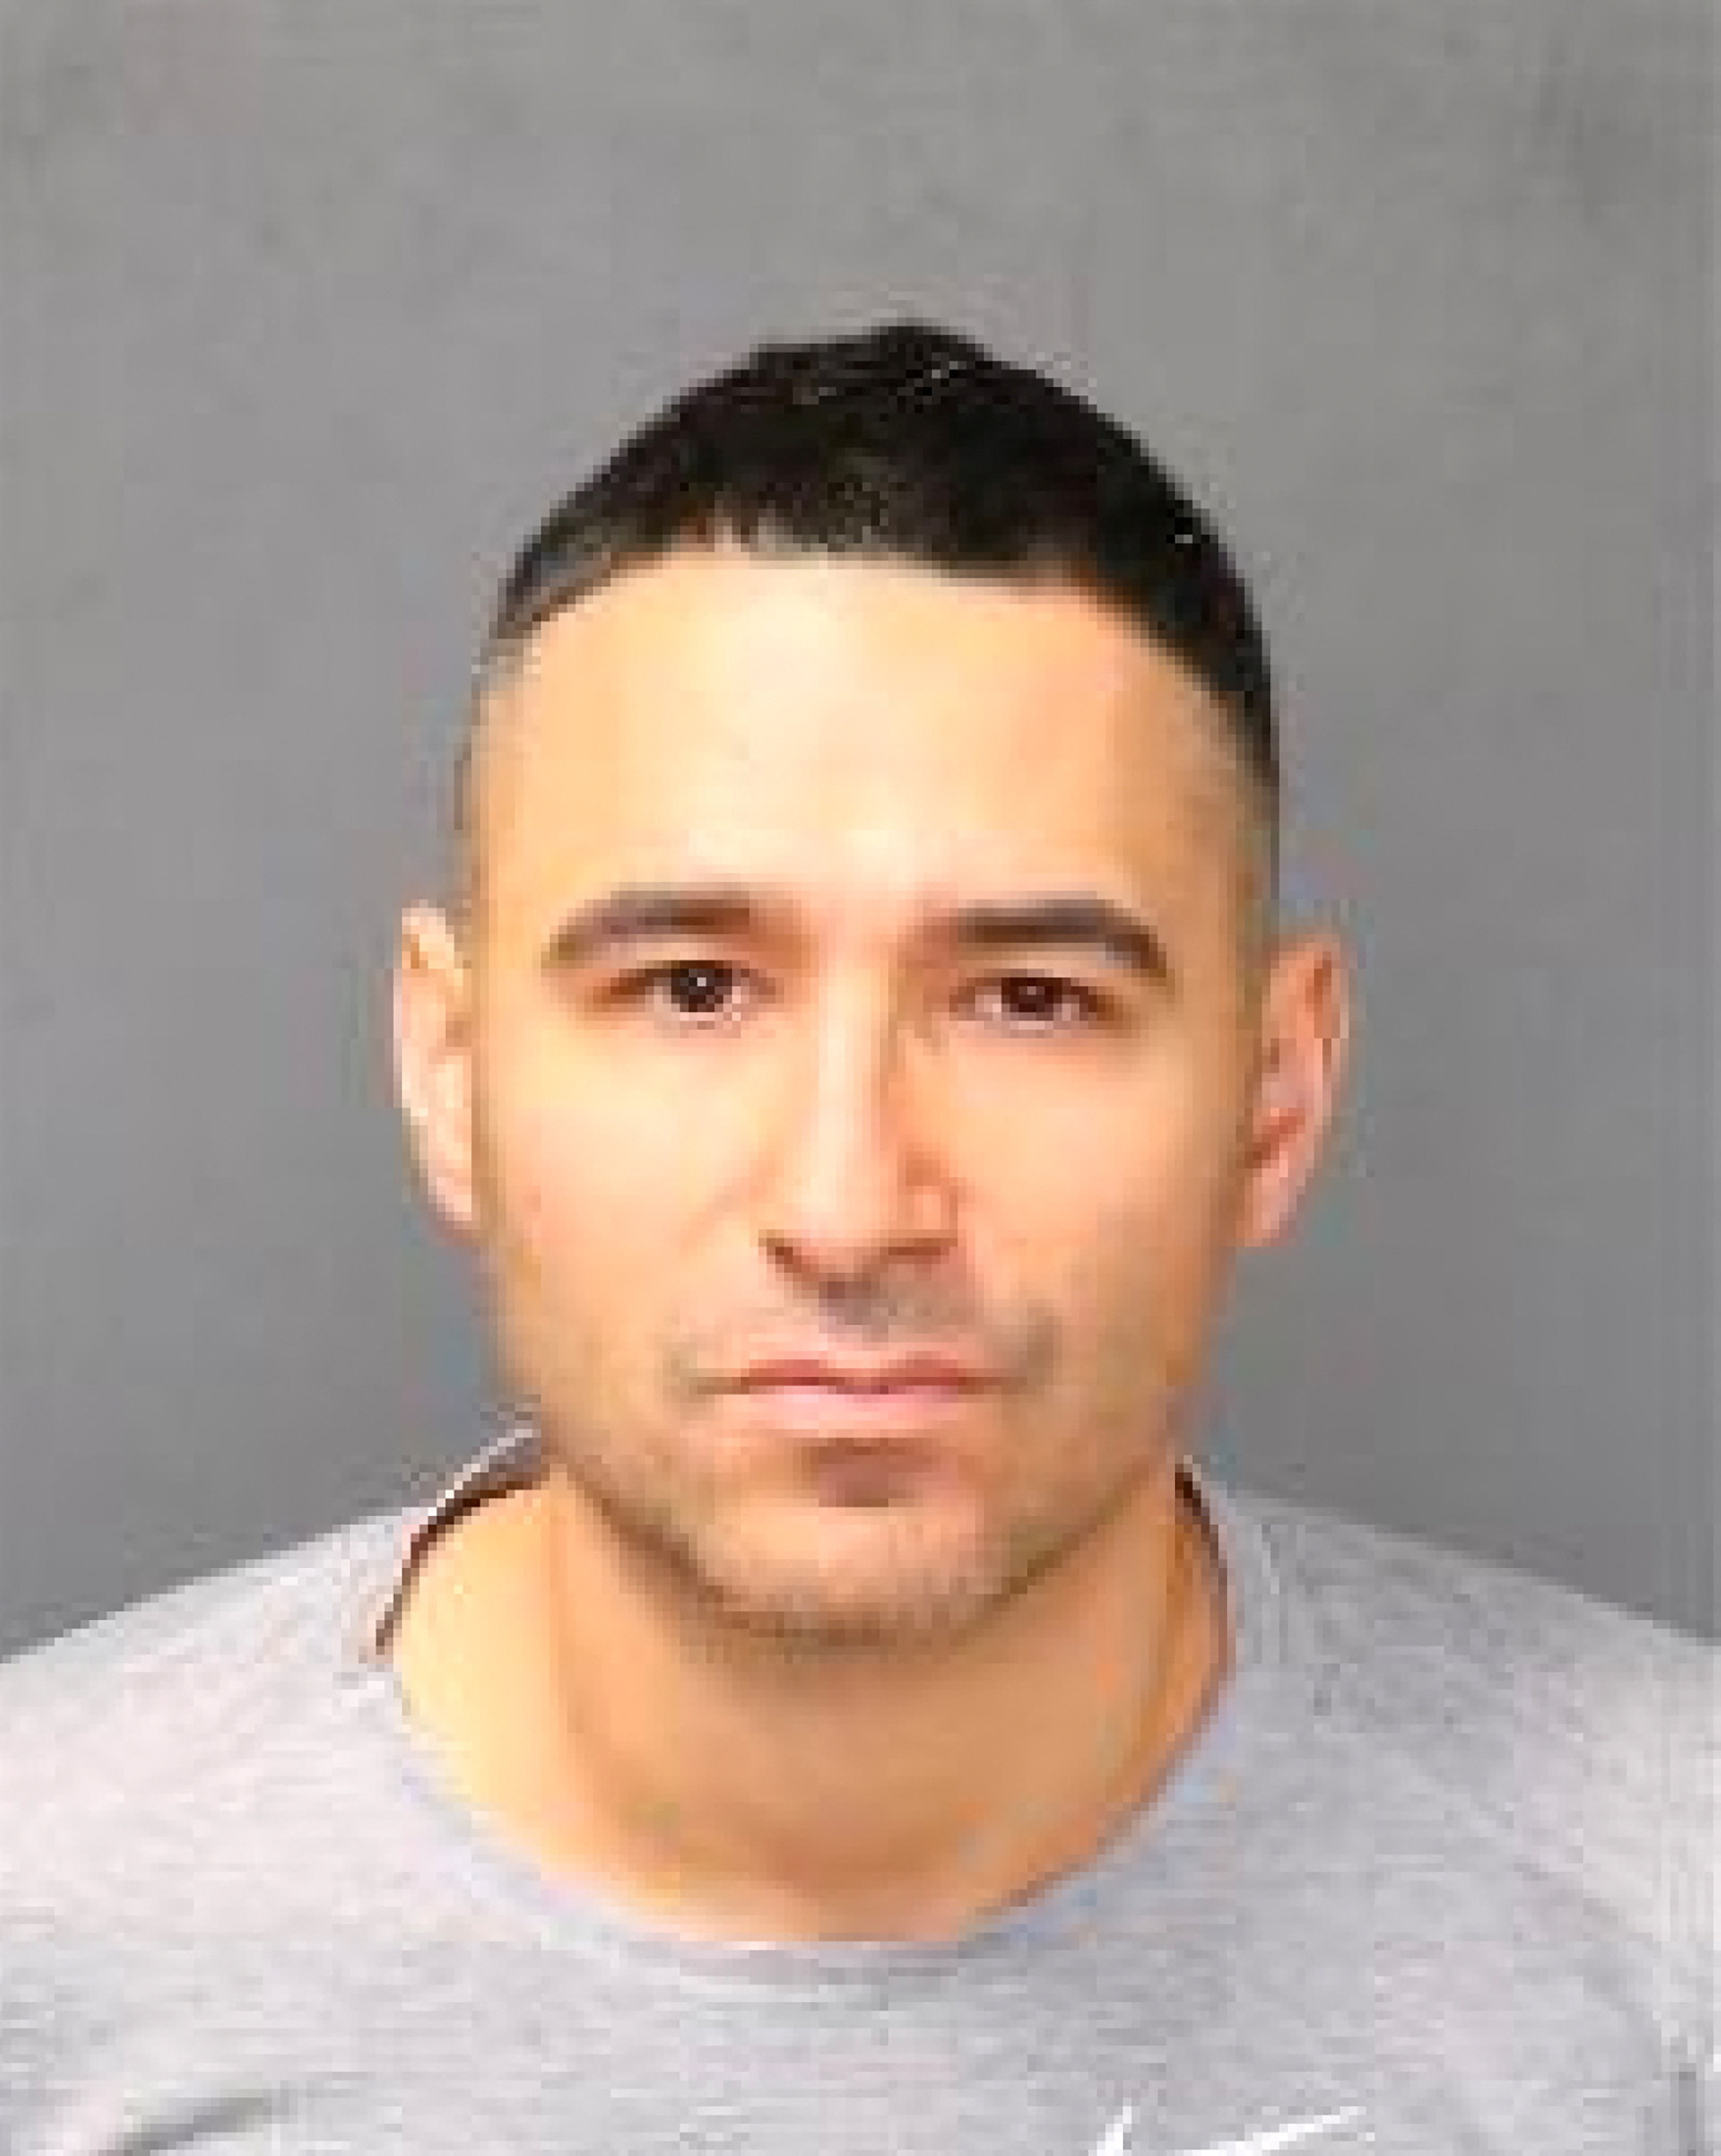 Solomon Pena poses for a jail booking photograph after his arrest by the Albuquerque Police Department